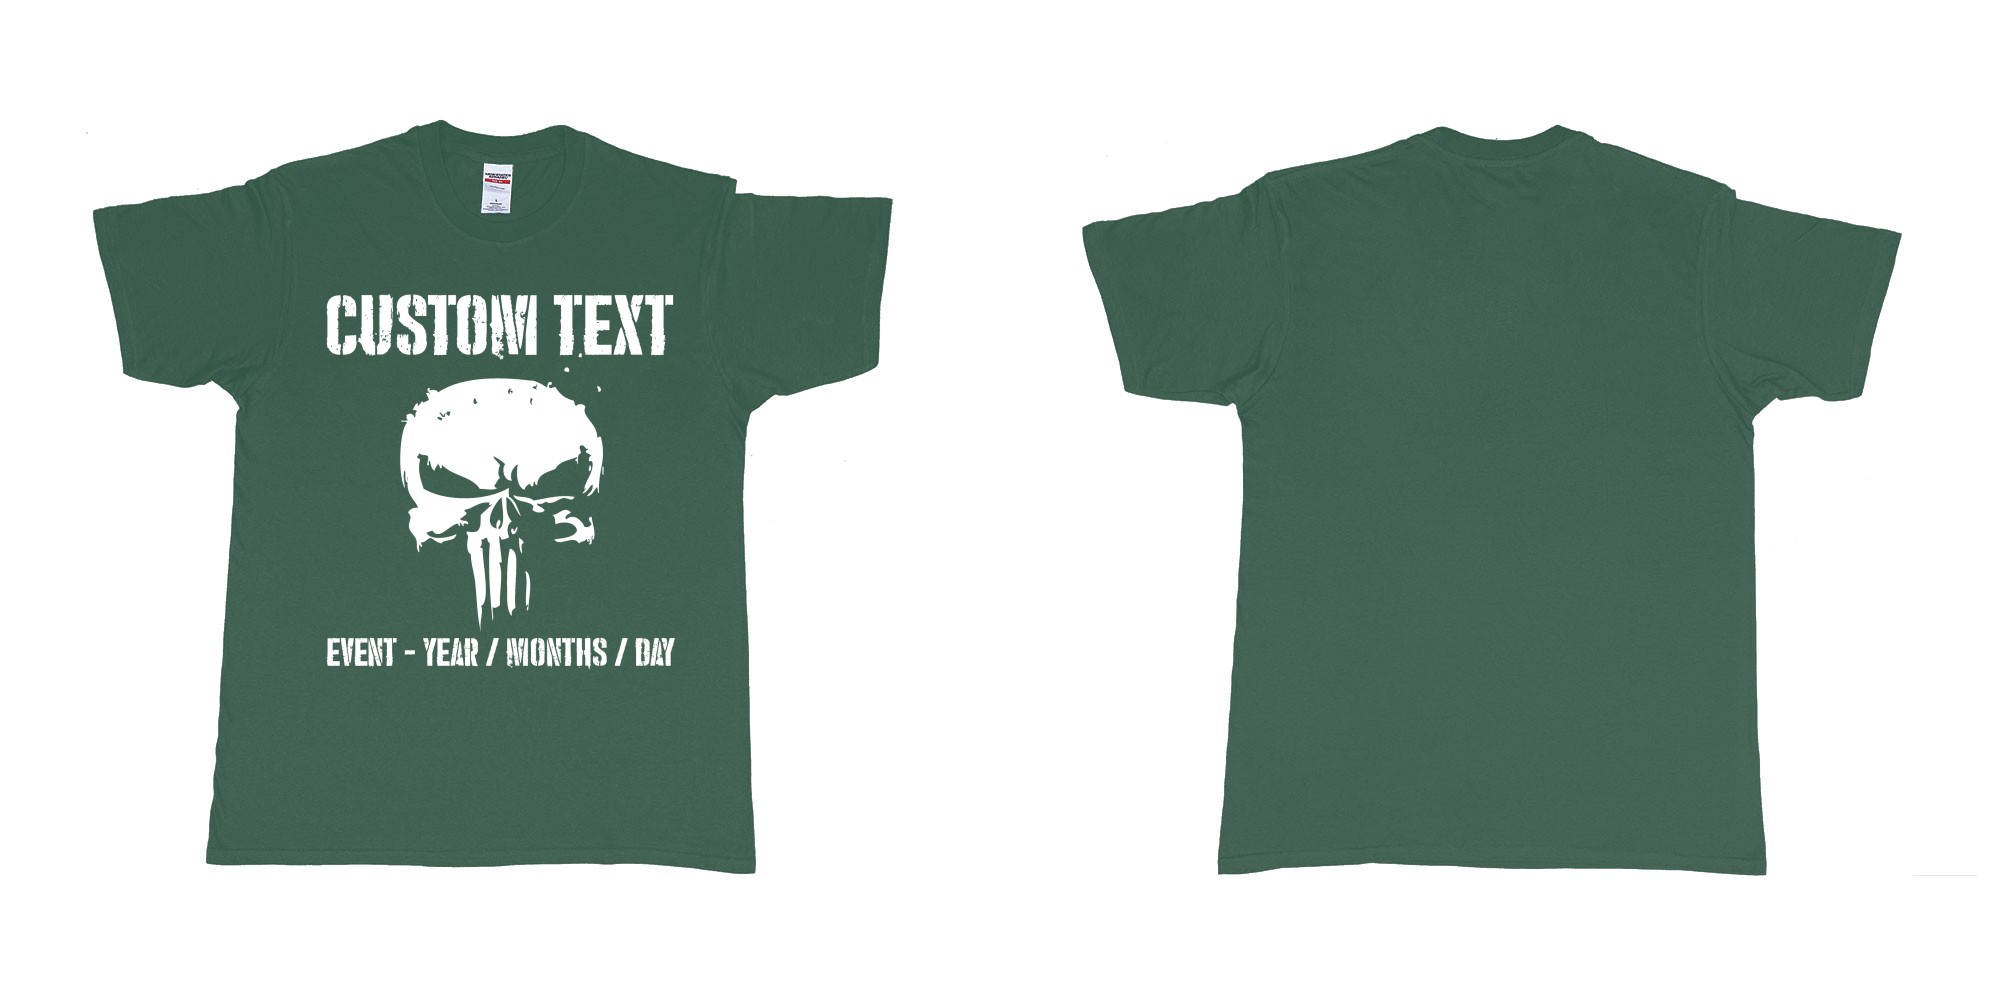 Custom tshirt design the punisher scull logo custom text in fabric color forest-green choice your own text made in Bali by The Pirate Way